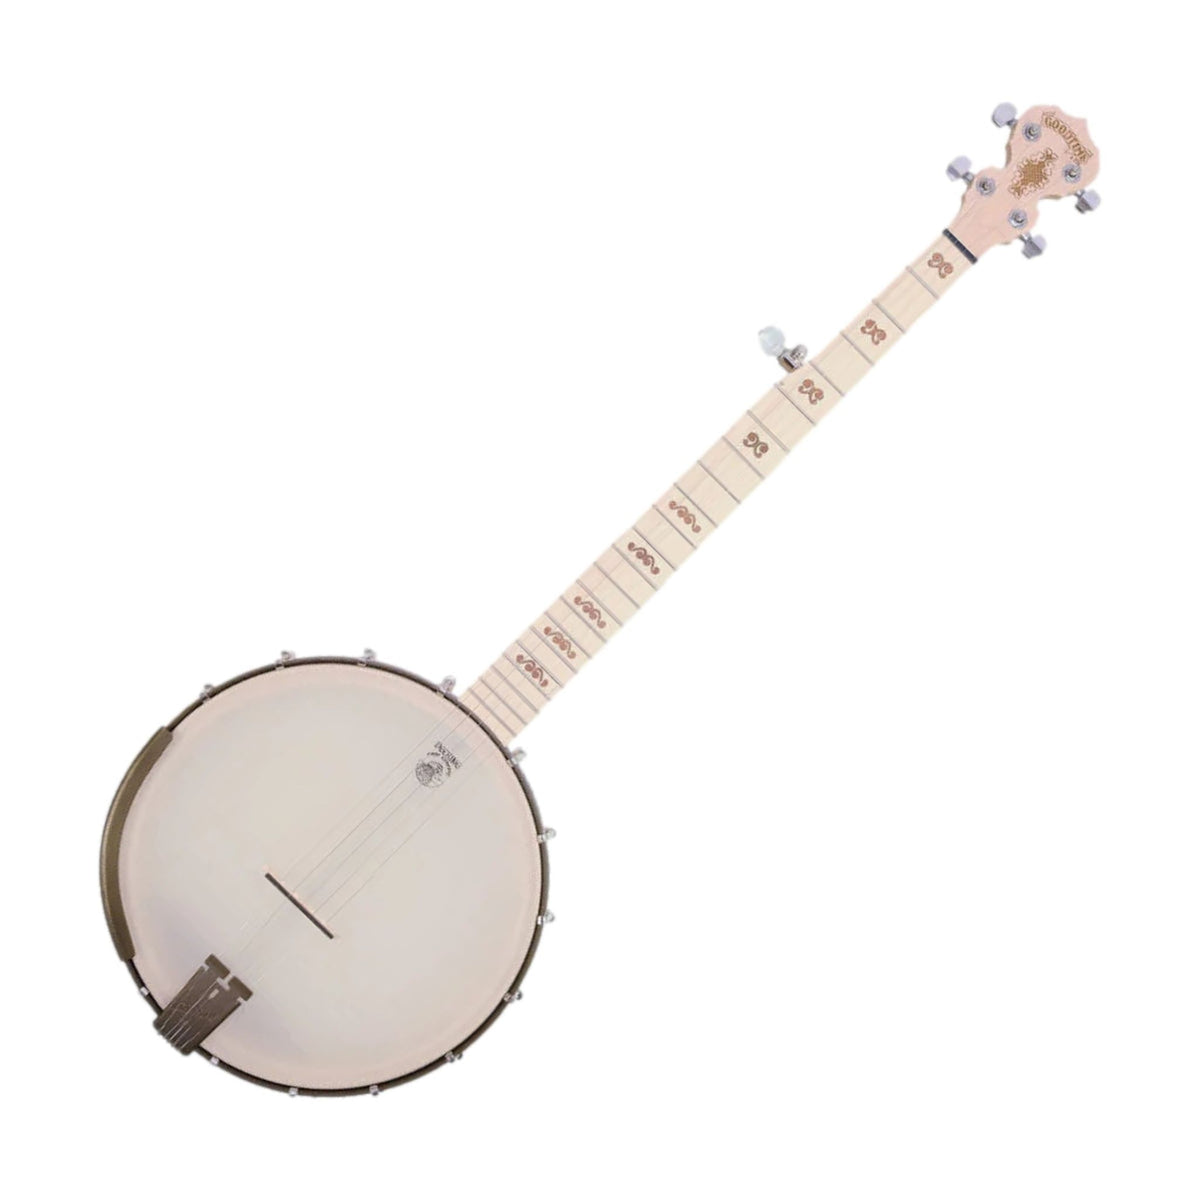 The Goodtime Americana Limited Edition Bronze banjo is a limited release of the extremely popular Americana banjo. An elegant Gold Rubbed Bronze finish offers an extremely durable, low maintenance and completely hypoallergenic hardware option.